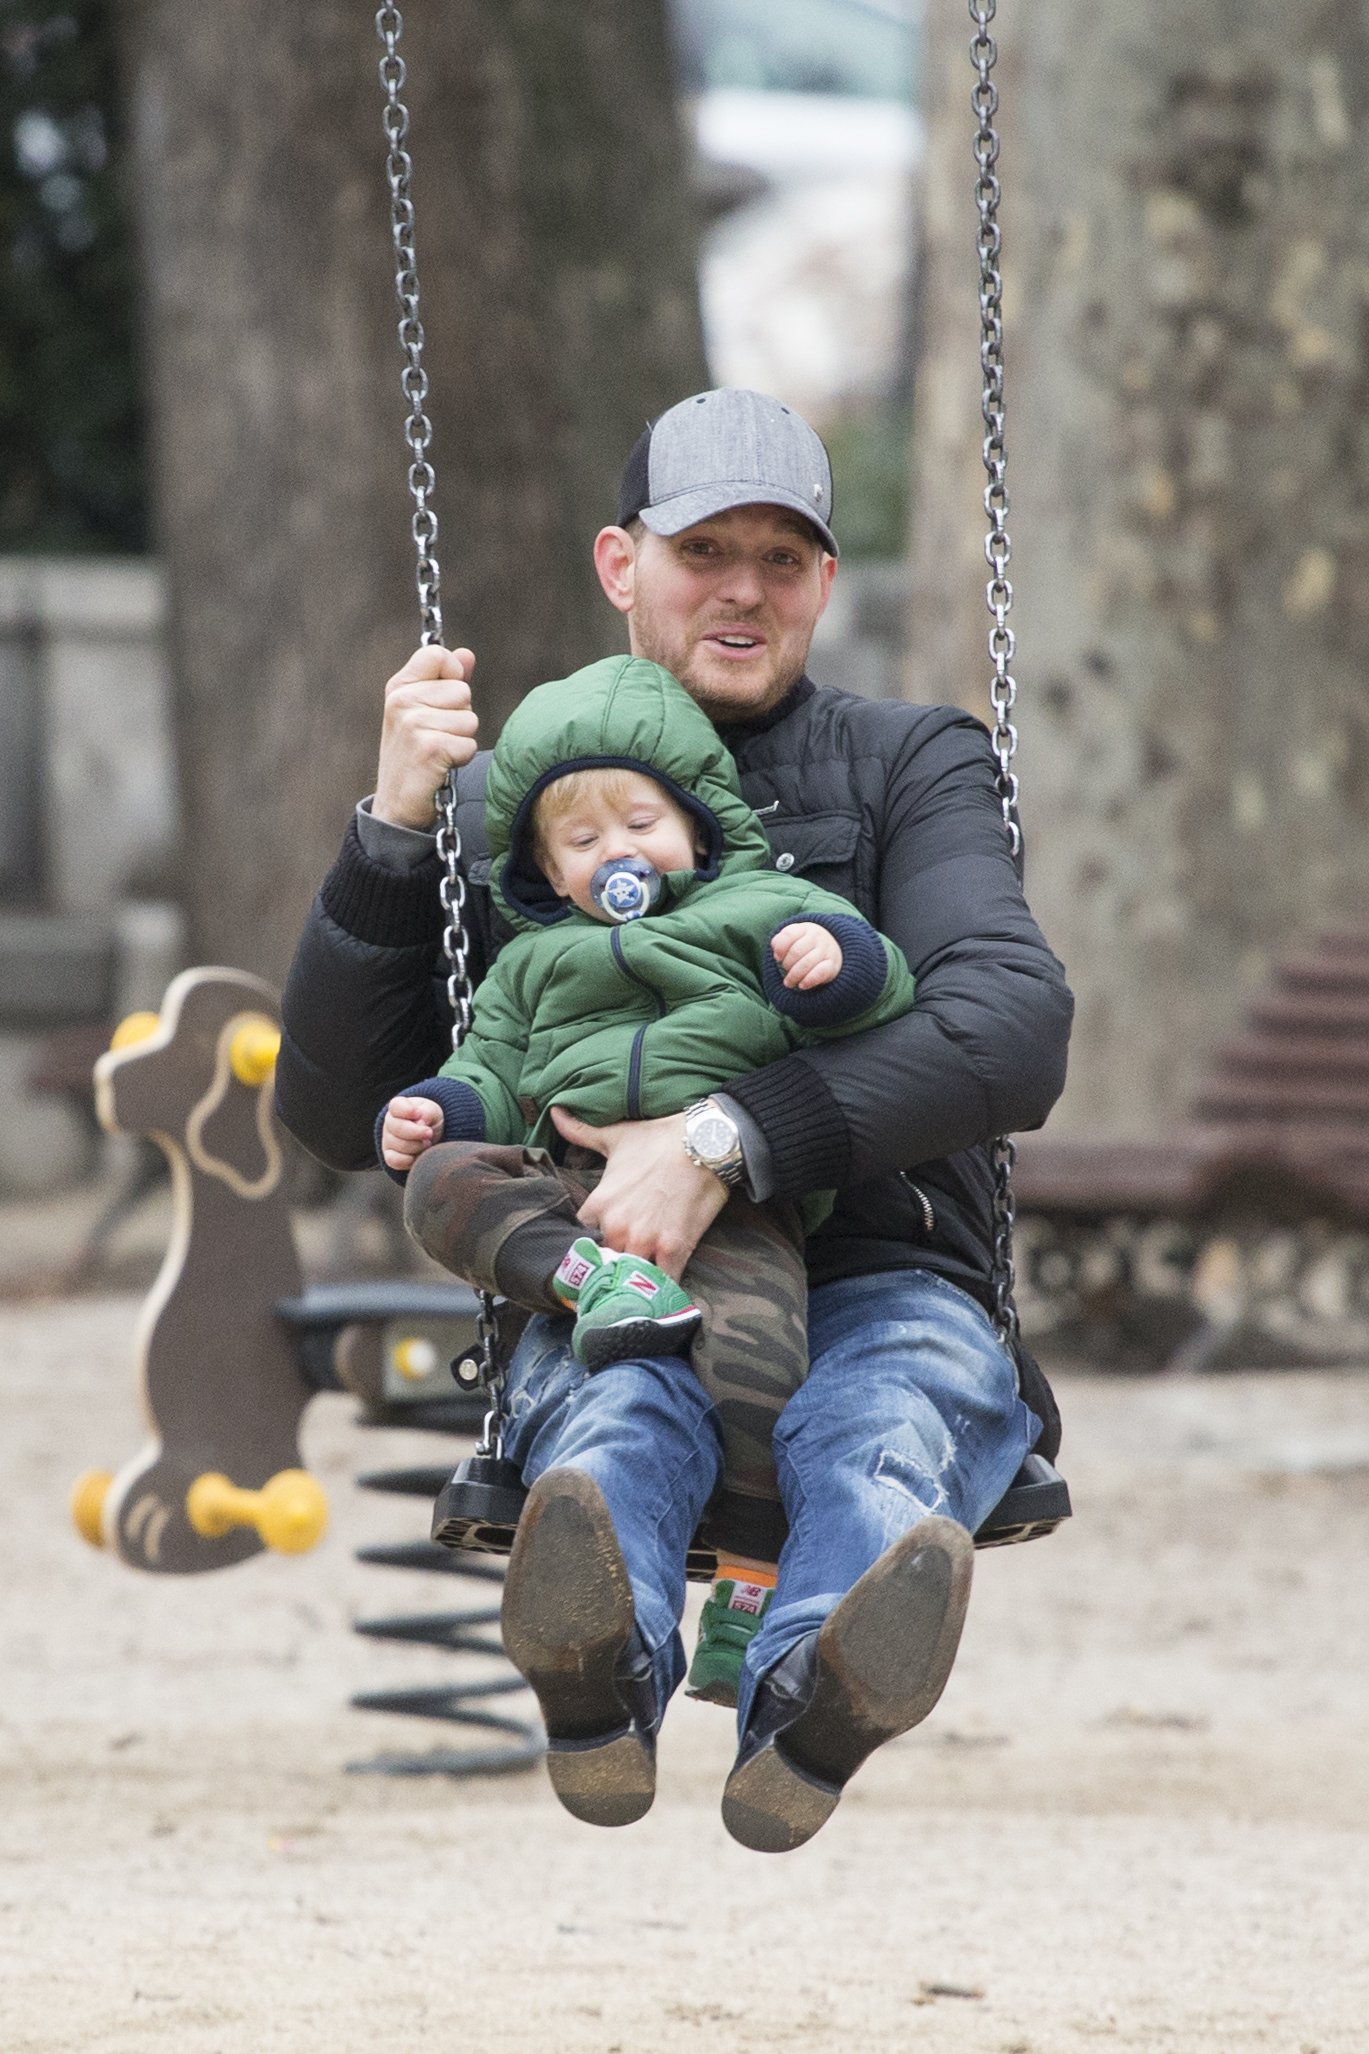 Michael Buble bonding with his son Noah at a playground on February 12, 2015, in Madrid, Spain. | Source: Iconic/GC Images/Getty Images